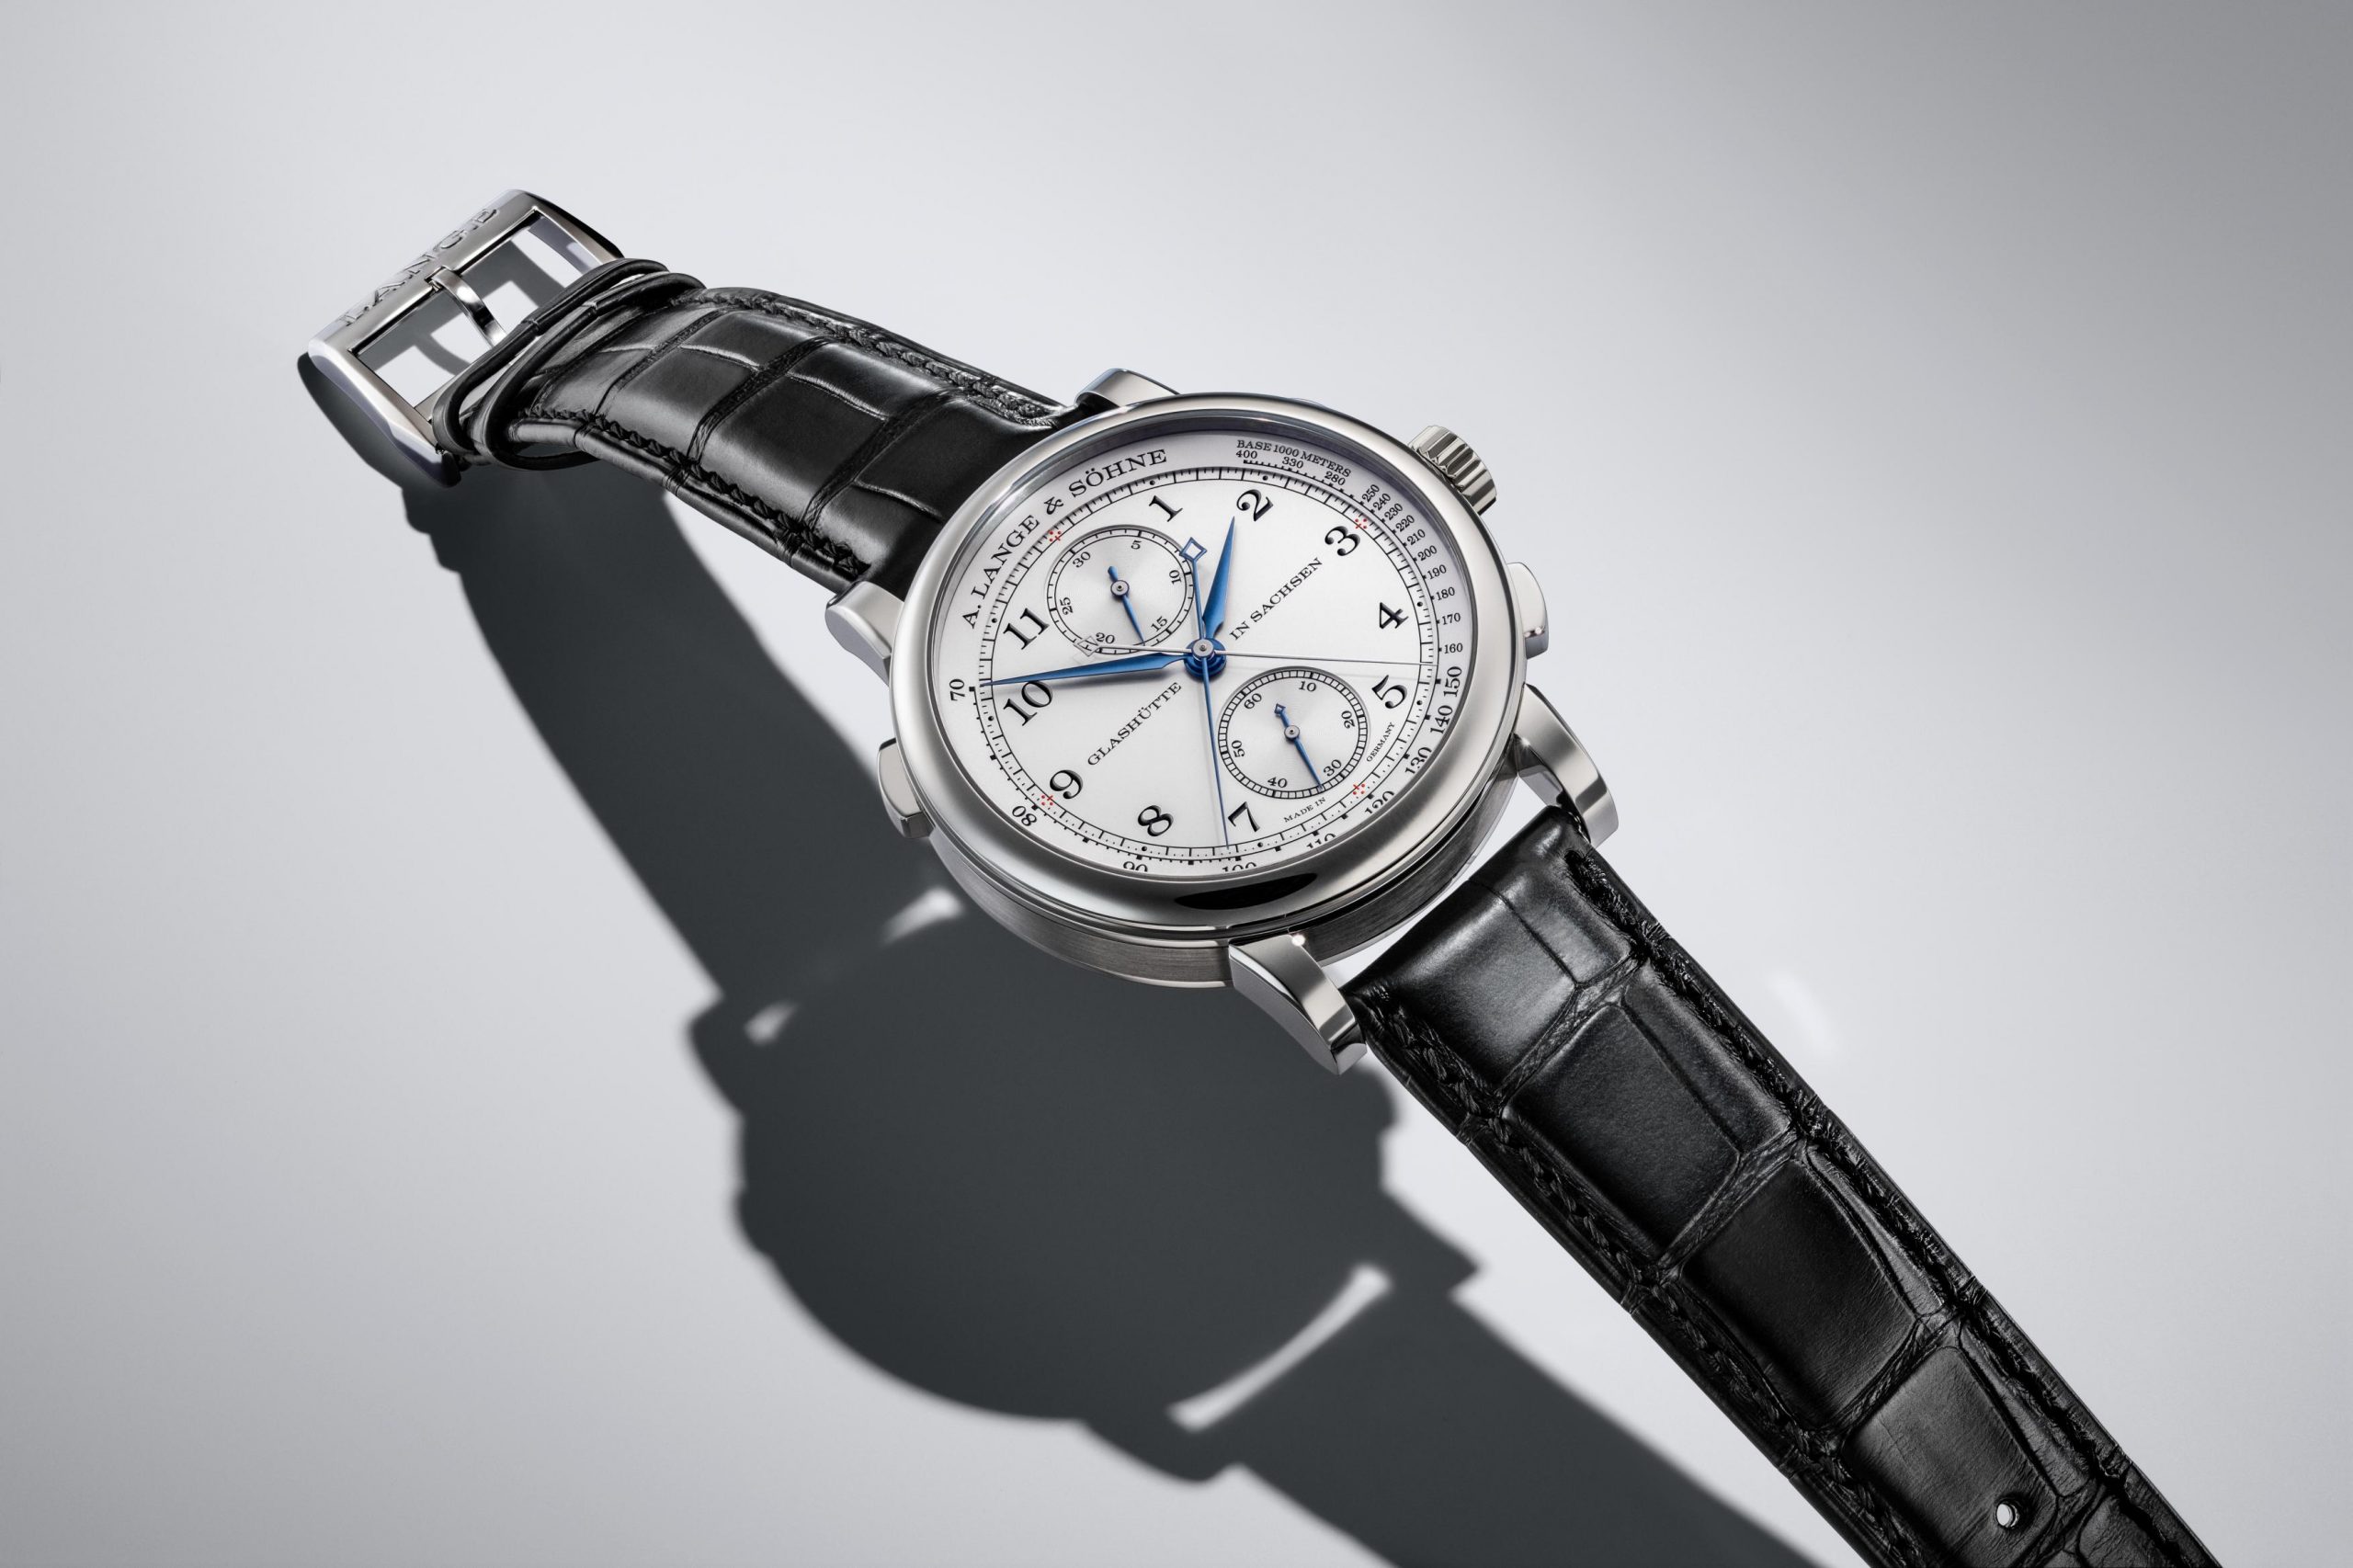 Watch Of The Week: A. Lange & Söhne’s 1815 Rattrapante Debuts In Platinum